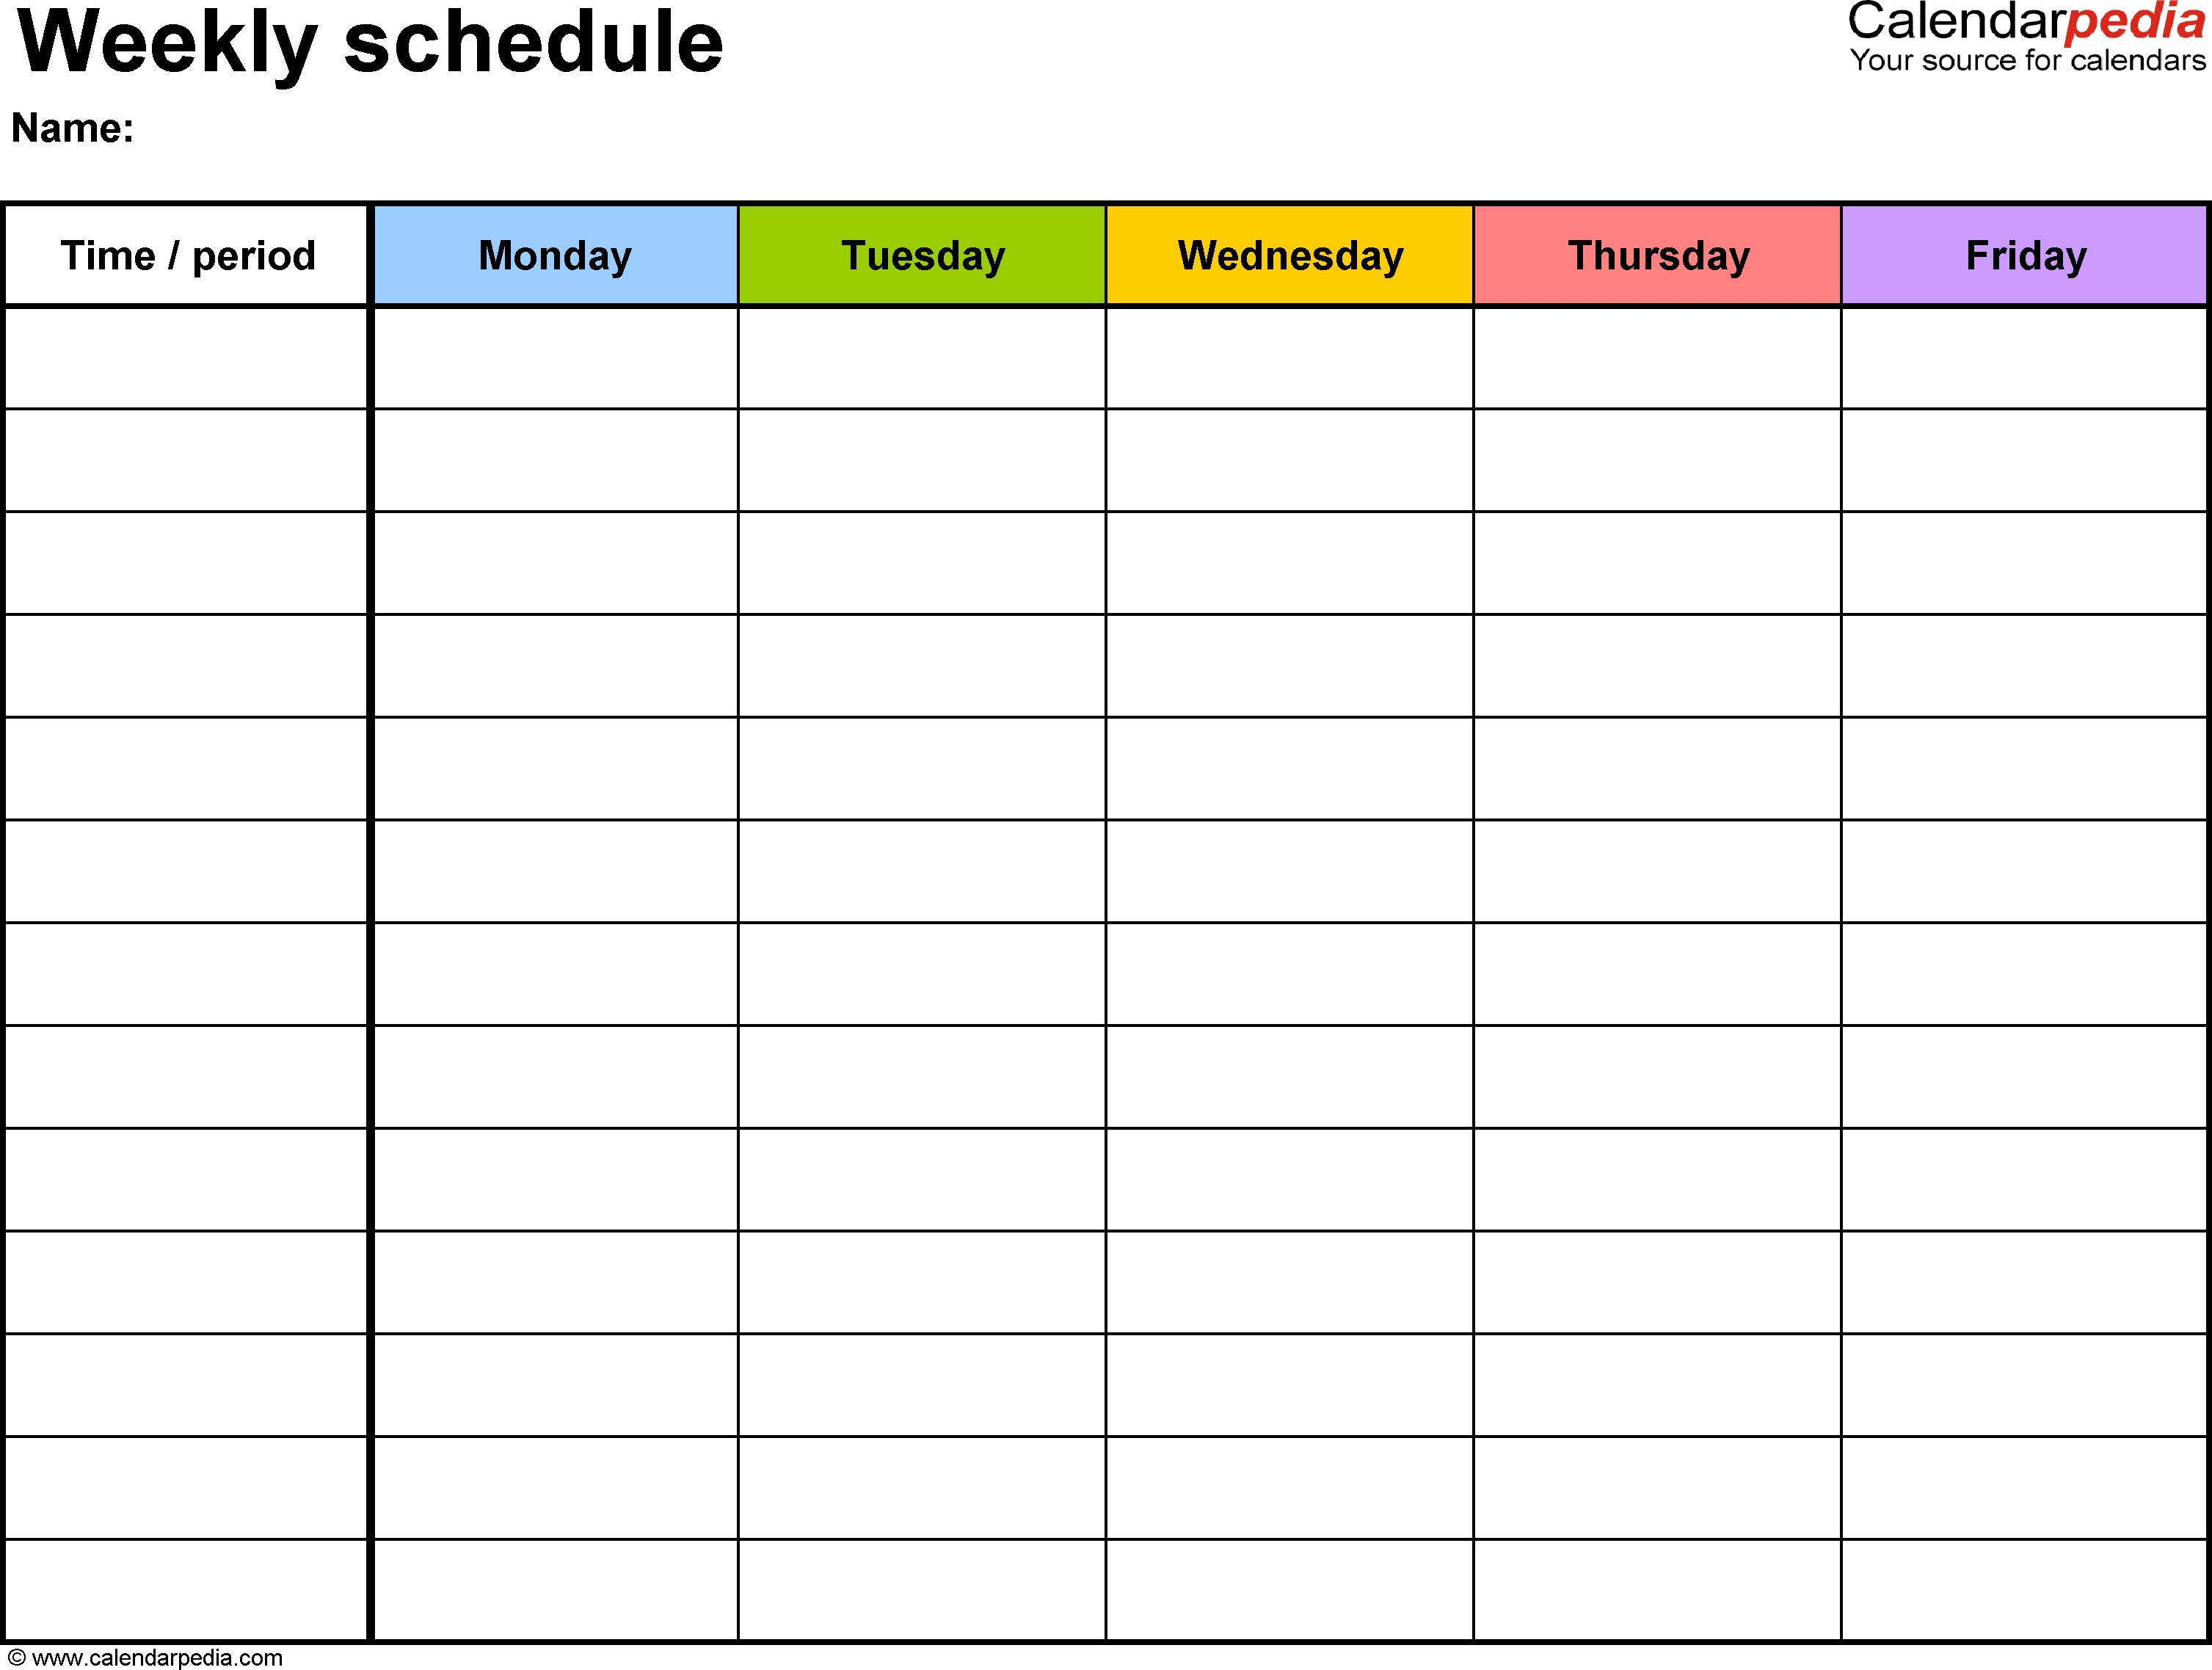 Free Weekly Schedule Templates For Word - 18 Templates with Blank Weekly Schedule Template Printable